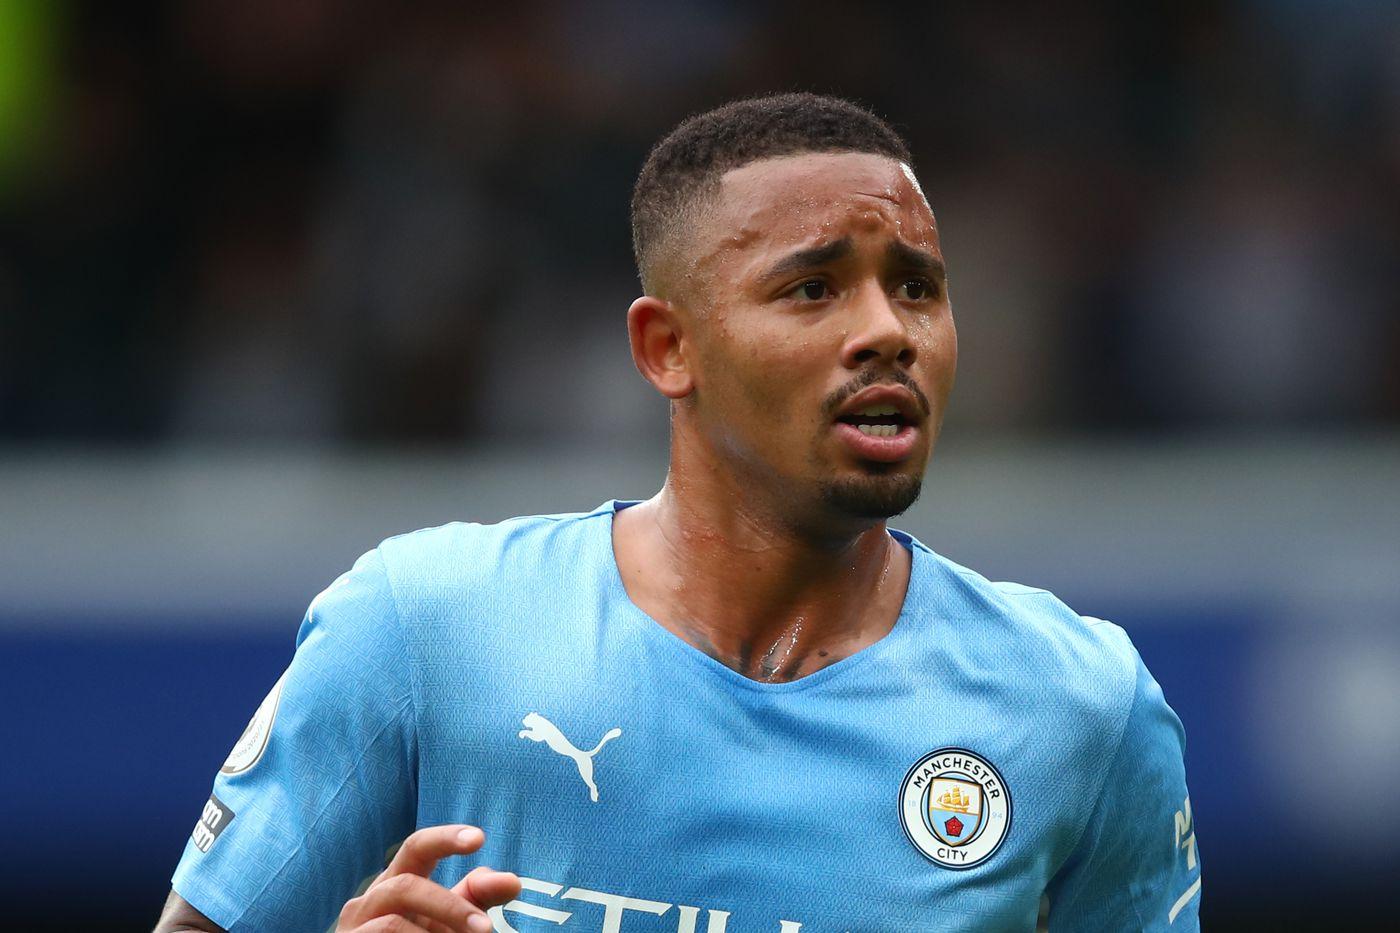 Arsenal agree deal to sign Man City’s Jesus